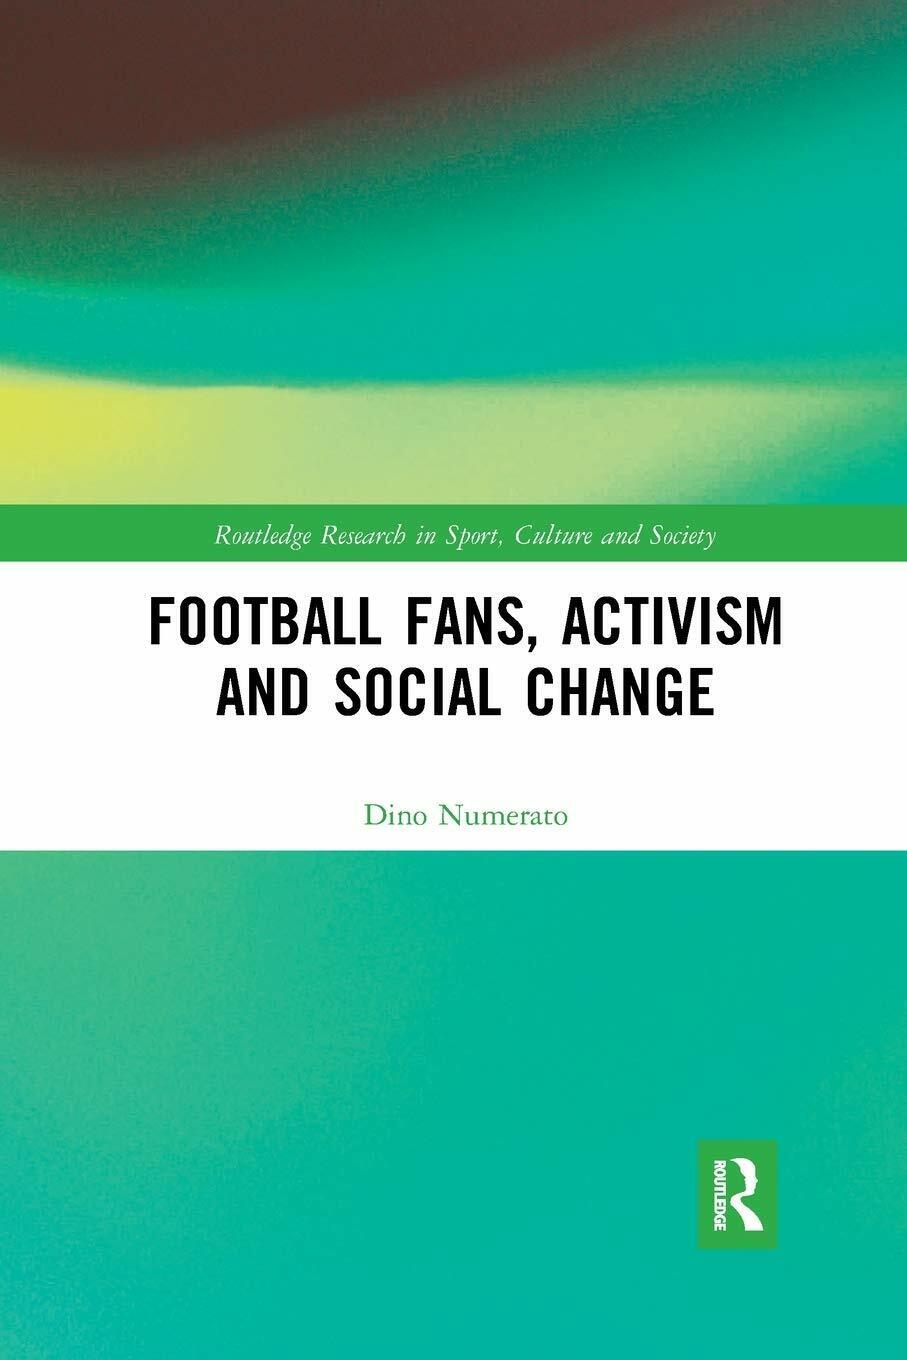 Football Fans, Activism And Social Change - Dino Numerato - Routledge, 2019